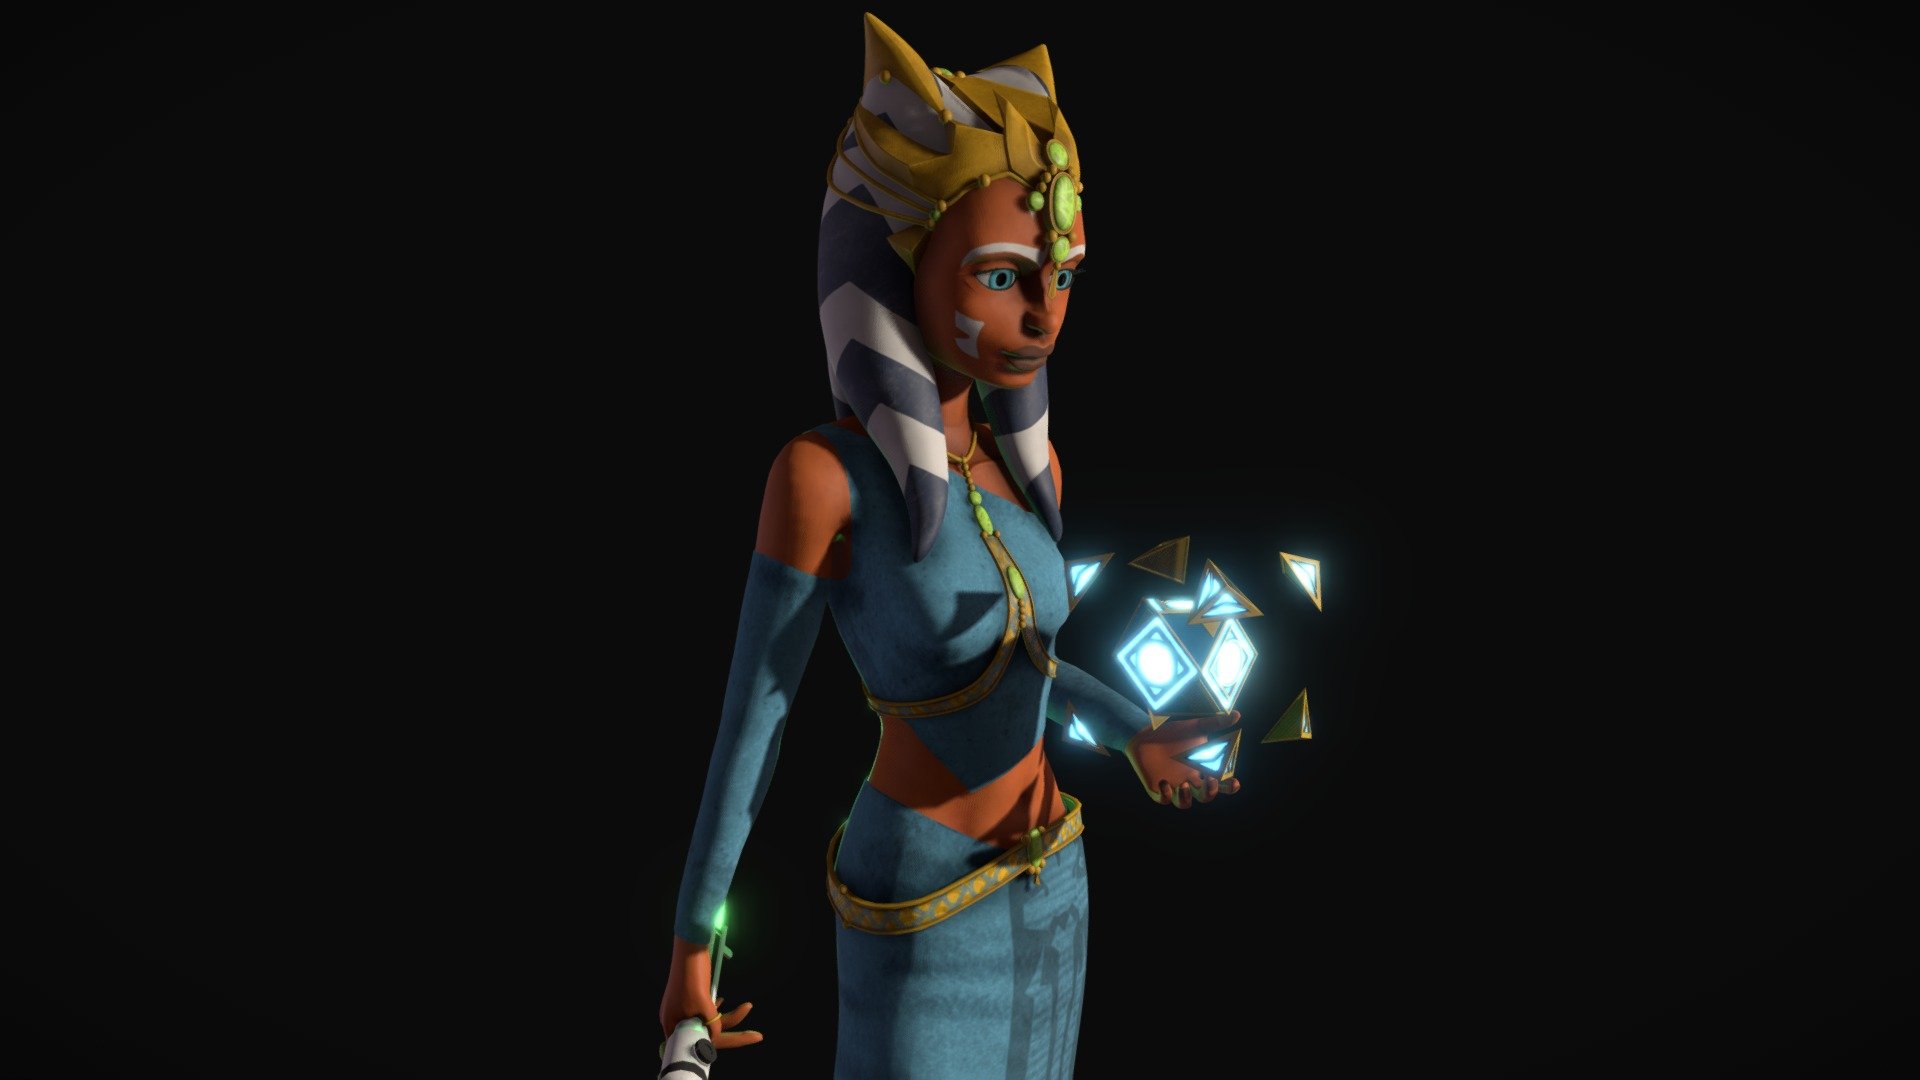 Made this for fun. Model is not rigged and &lsquo;as is'.

View UE4 renders here: https://www.artstation.com/artwork/L2KNO0 - Ahsoka Tano Zygerrian Slave Disguise - Buy Royalty Free 3D model by Jordan Younie (@fussionzz97) 3d model